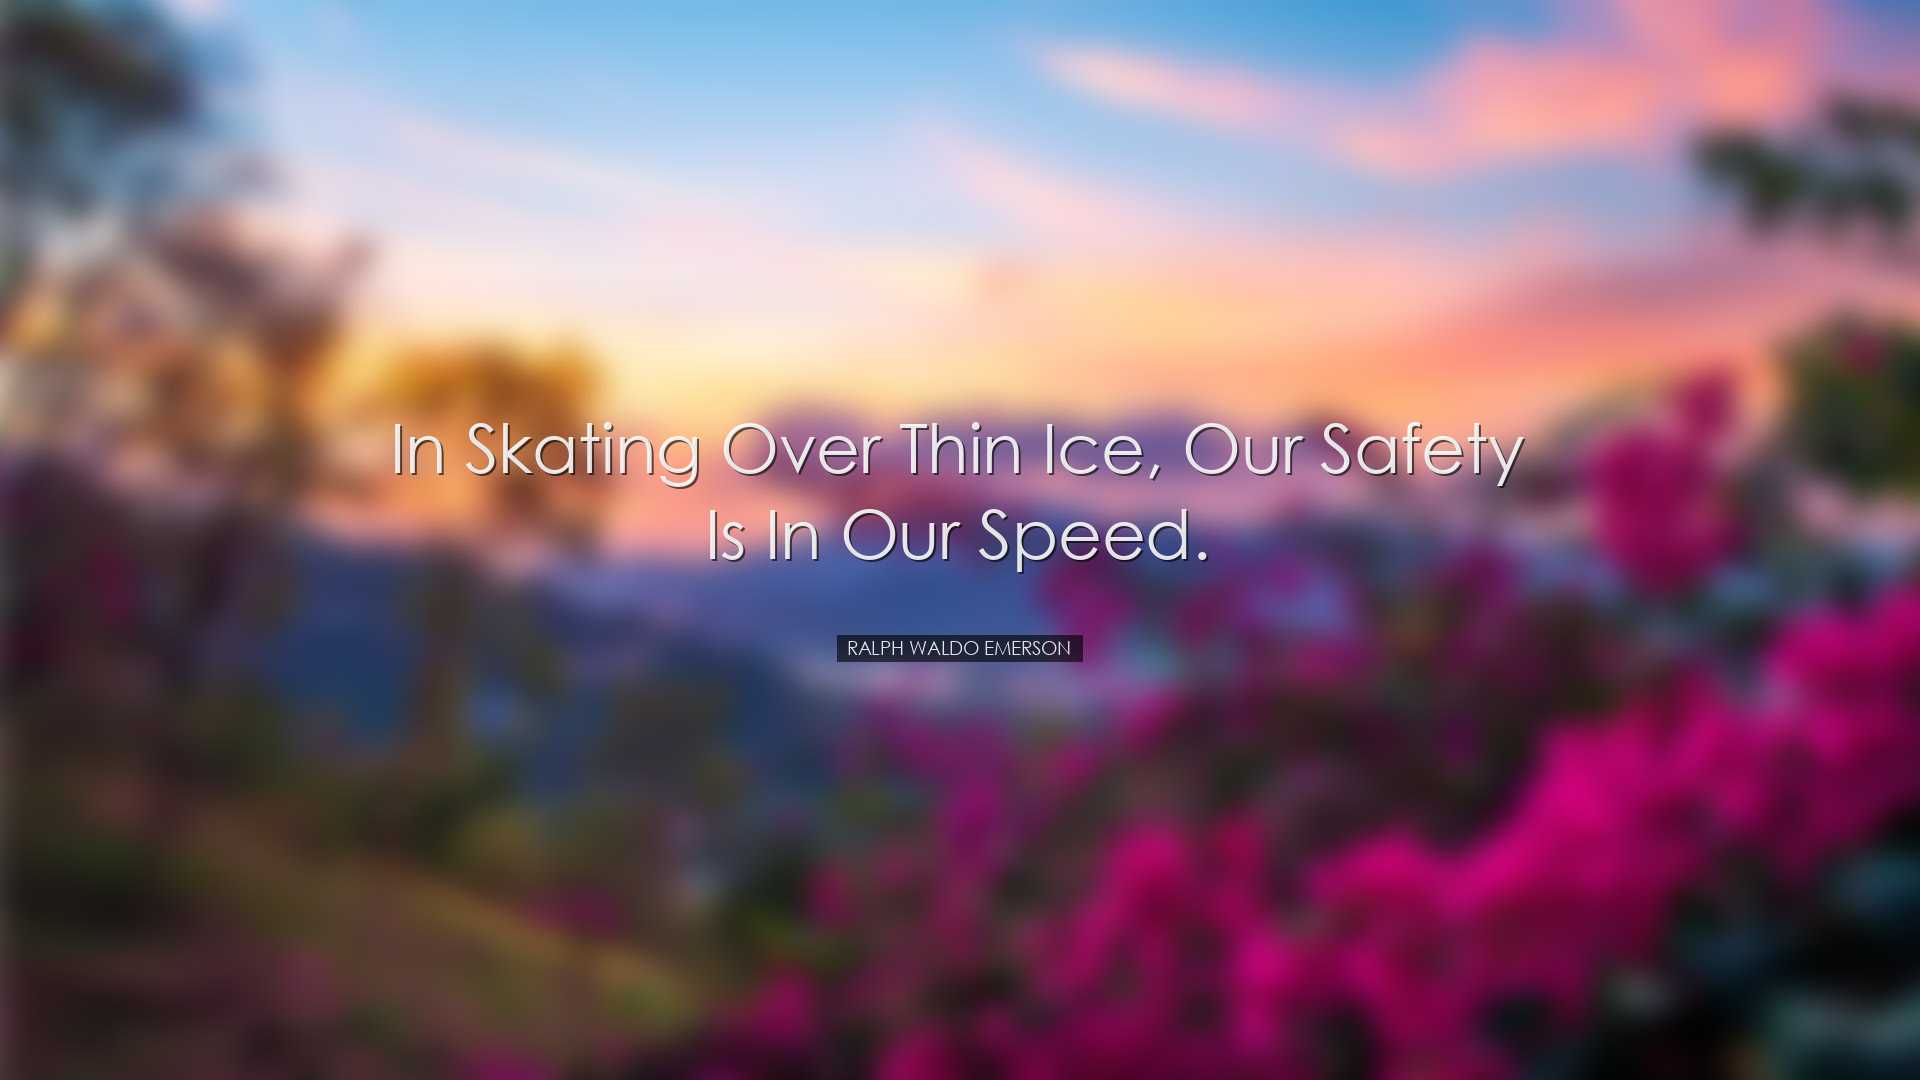 In skating over thin ice, our safety is in our speed. - Ralph Wald